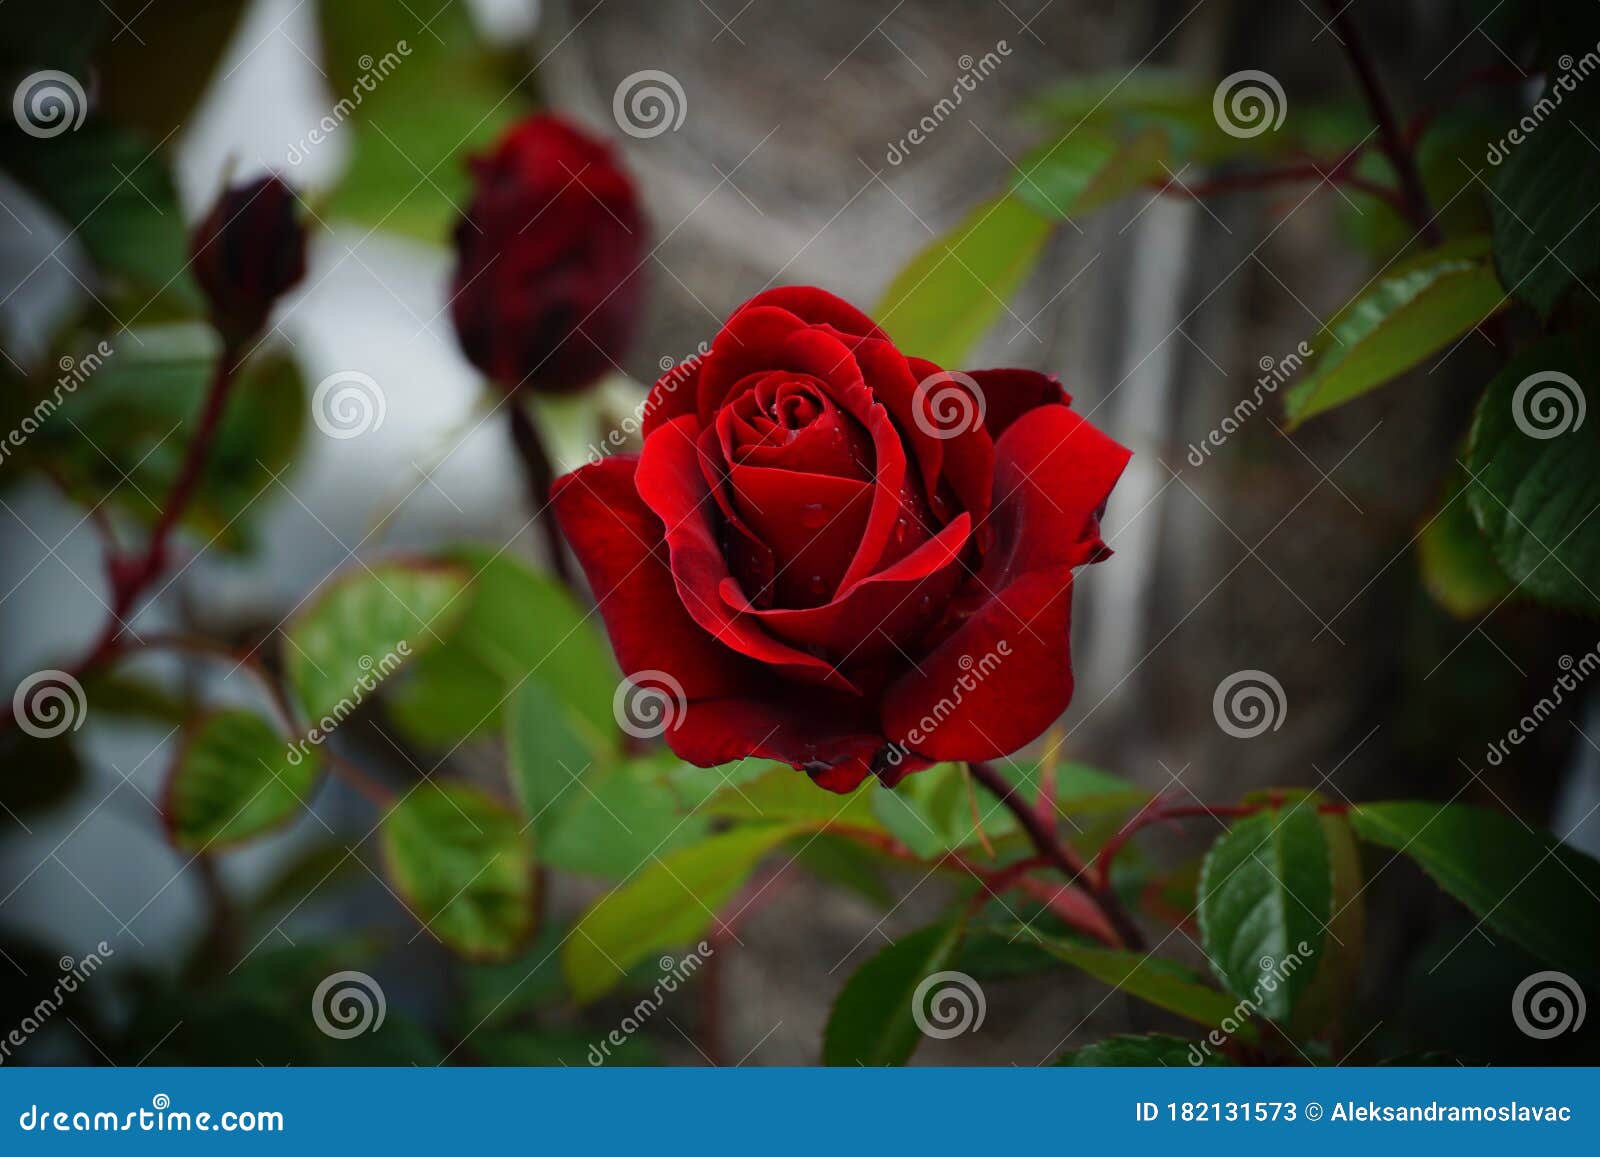 A Beautiful Red Rose in a Bud, in the Magical Atmosphere of a Rose ...